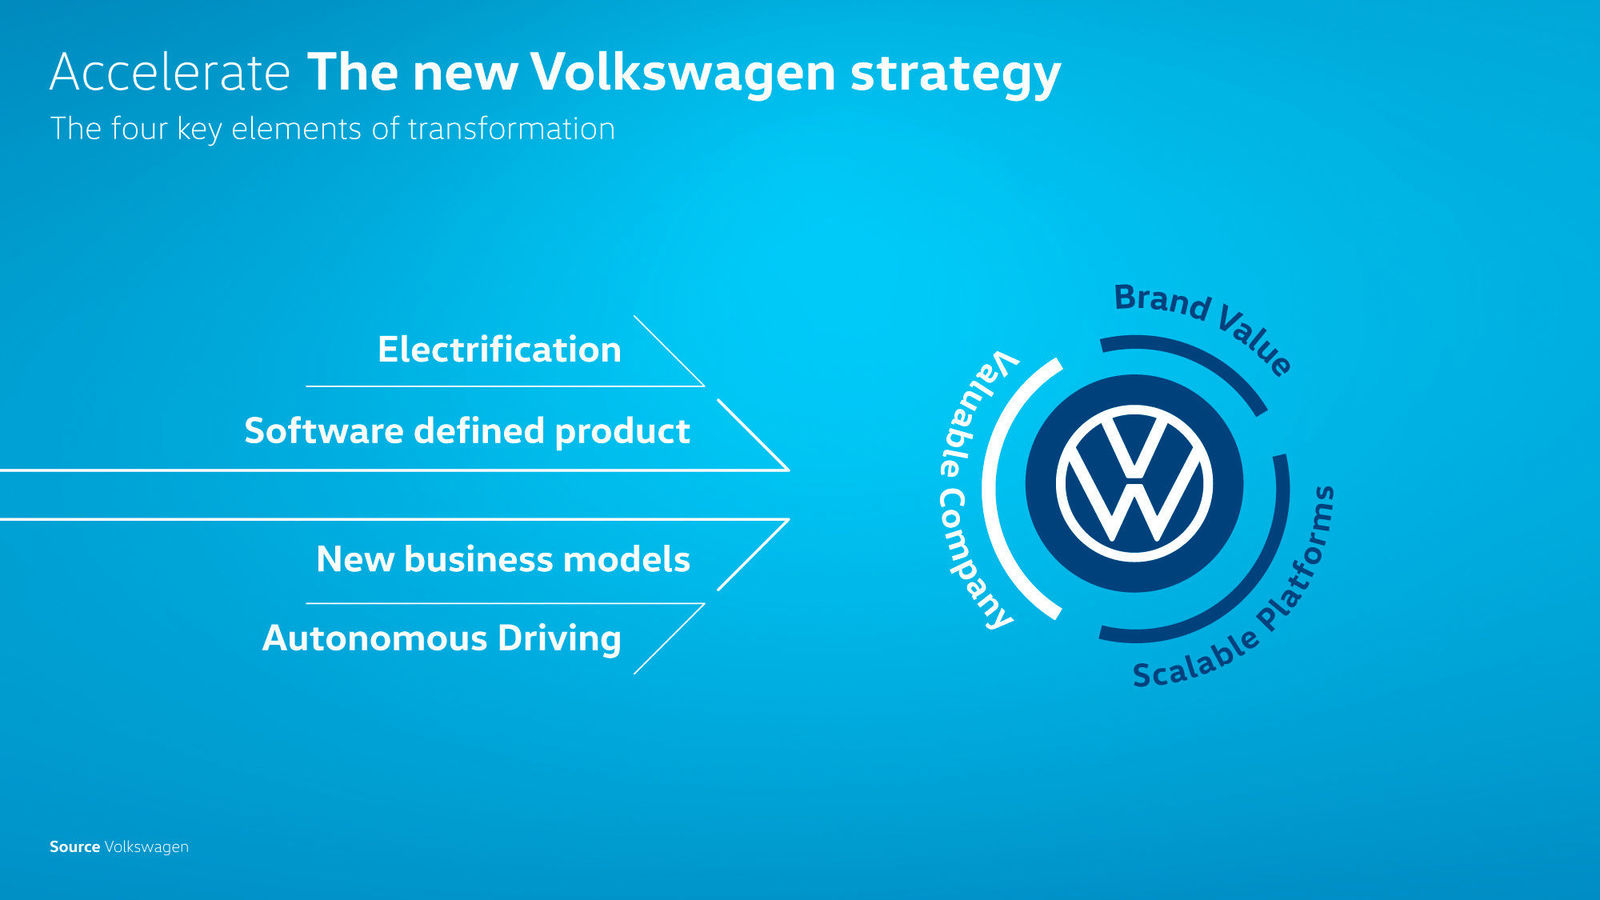 Accelerate! The new Volkswagen strategy